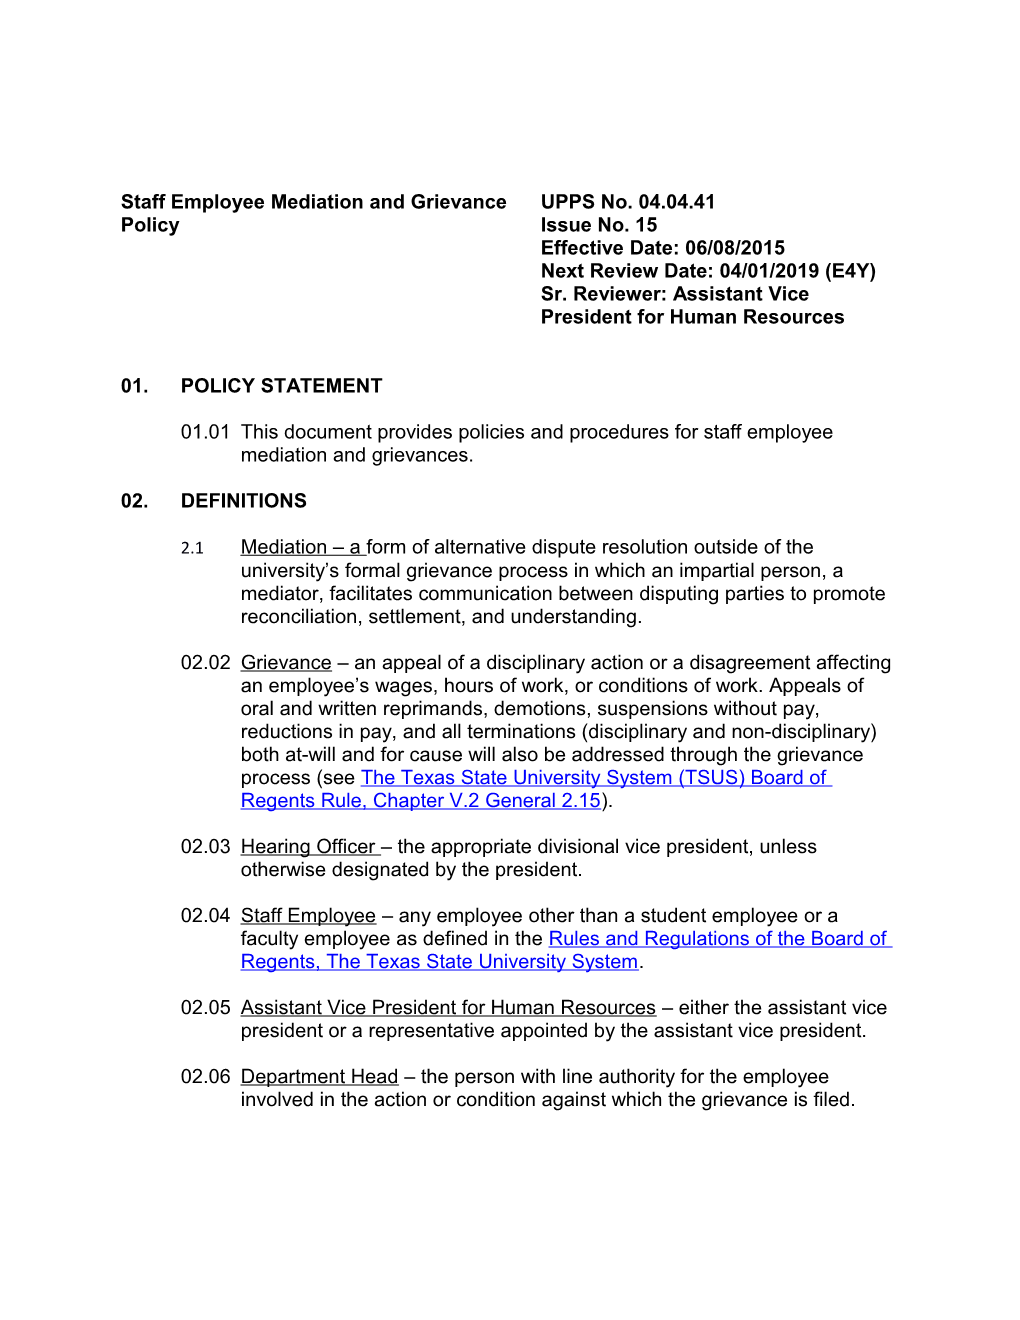 Staff Employee Mediation and Grievance UPPS No. 04.04.41